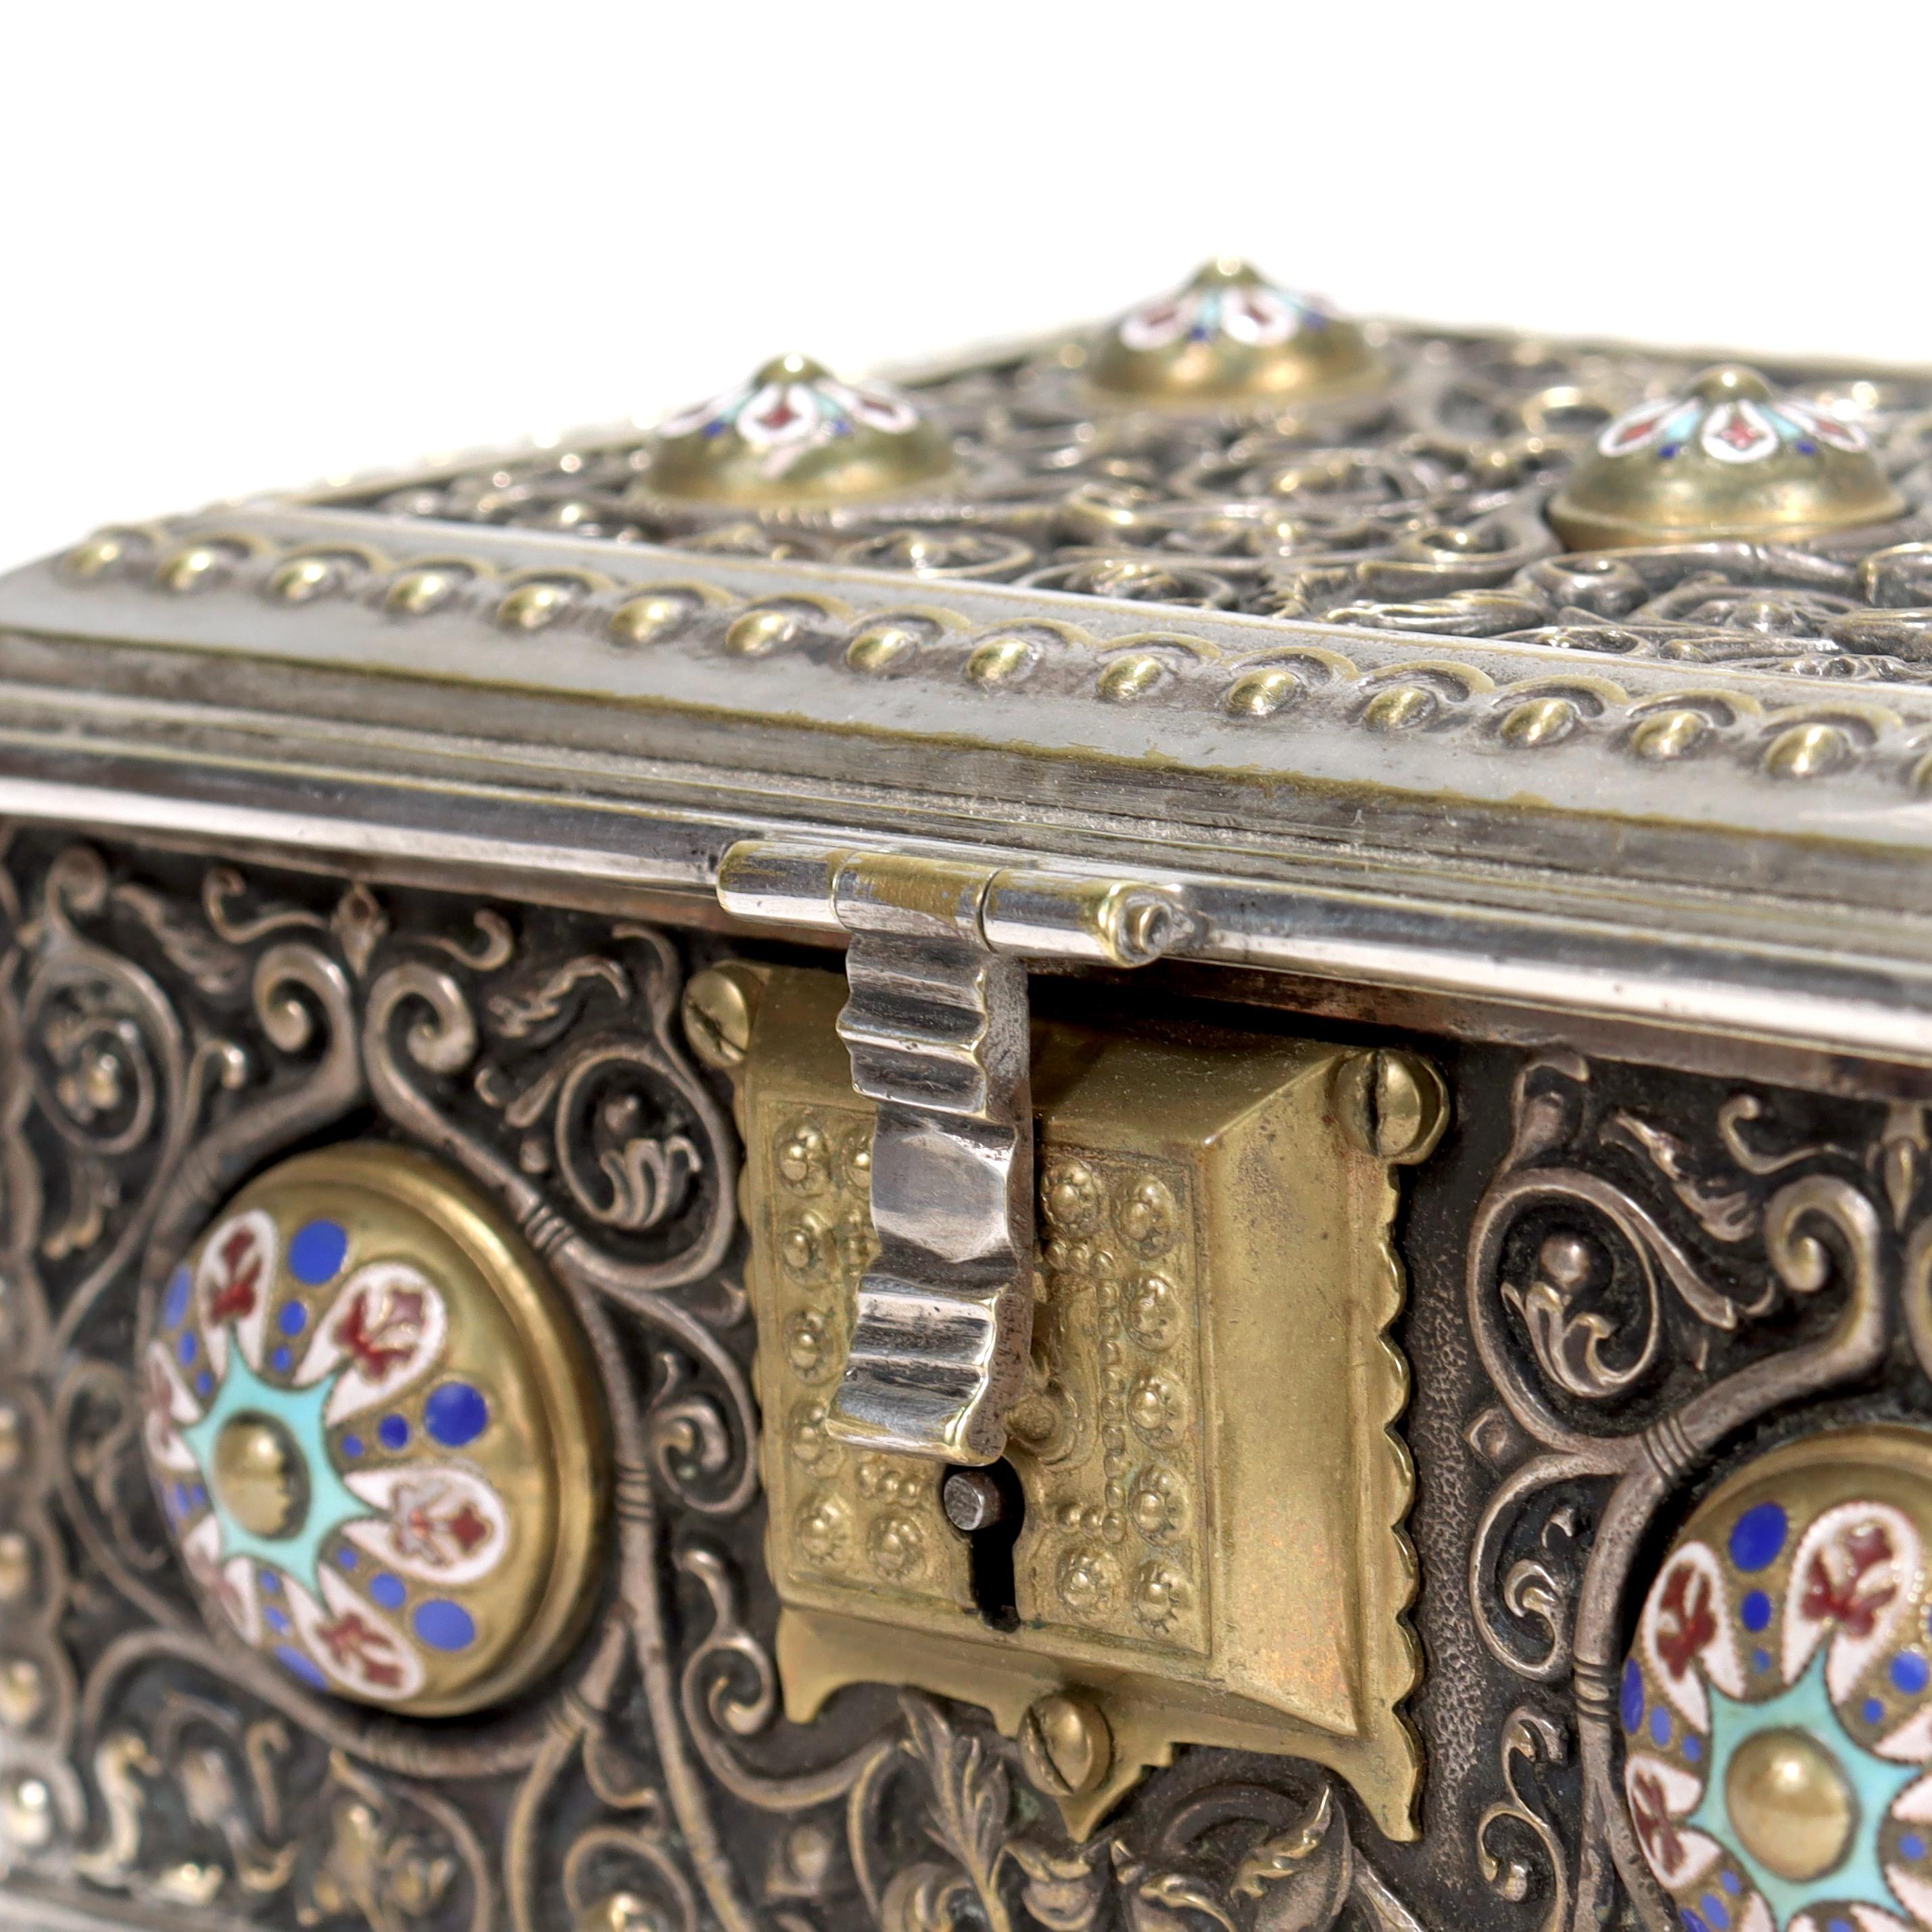 Antique Silver Plated & Enameled Table Box or Casket in the Russian Taste For Sale 10